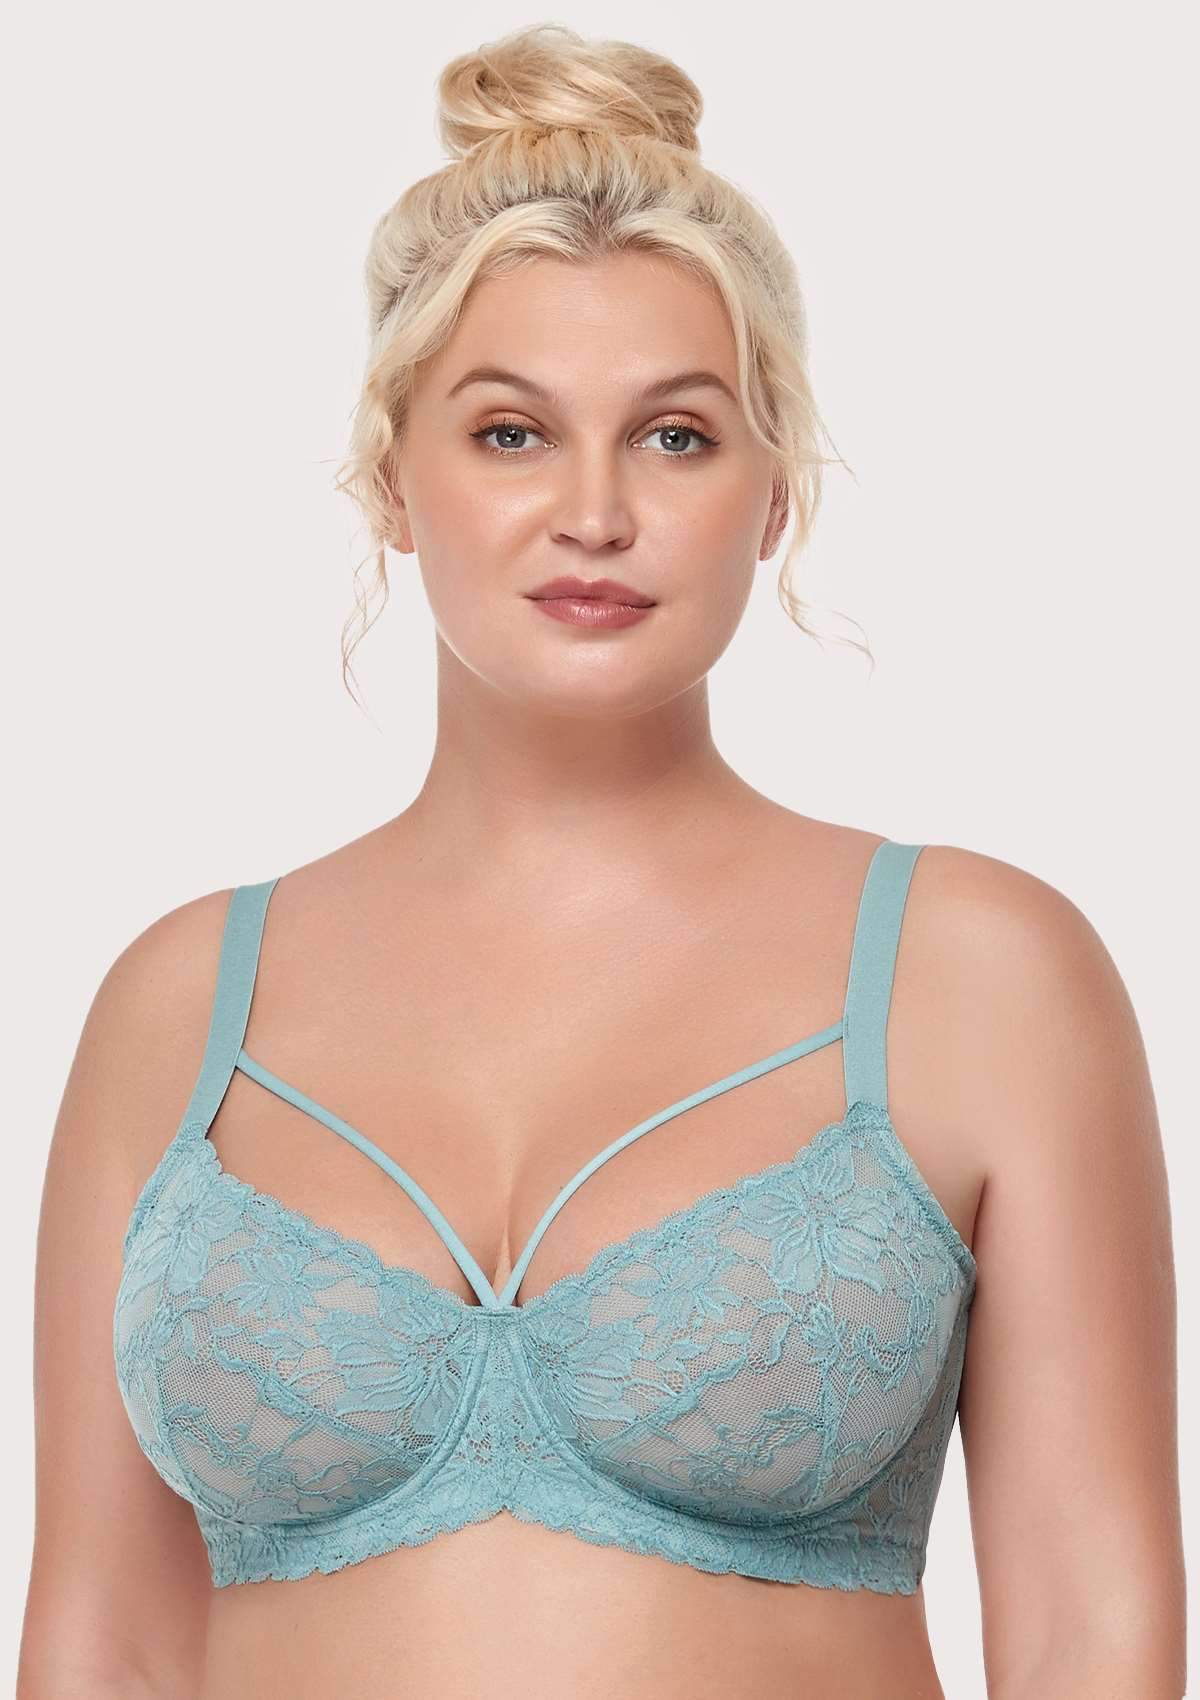 HSIA Pretty In Petals Unlined Lace Bra: Comfortable And Supportive Bra - Pewter Blue / 40 / C